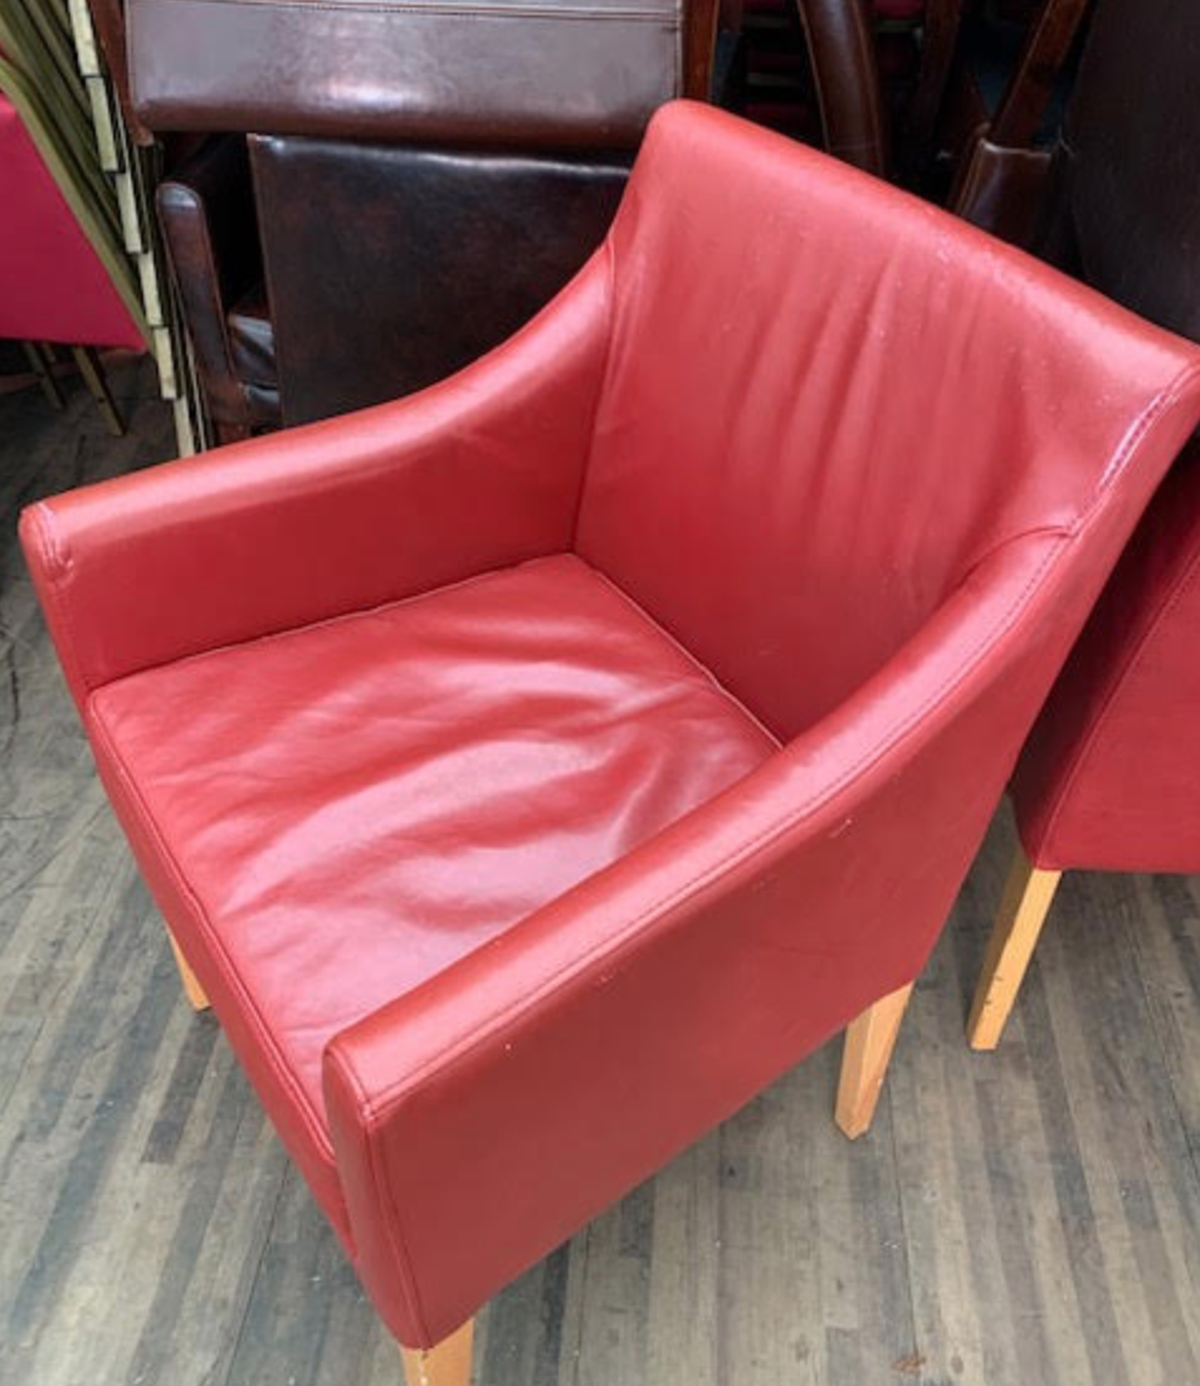 Secondhand Chairs and Tables | Tub Chairs | 8x Good Tub Chairs - London